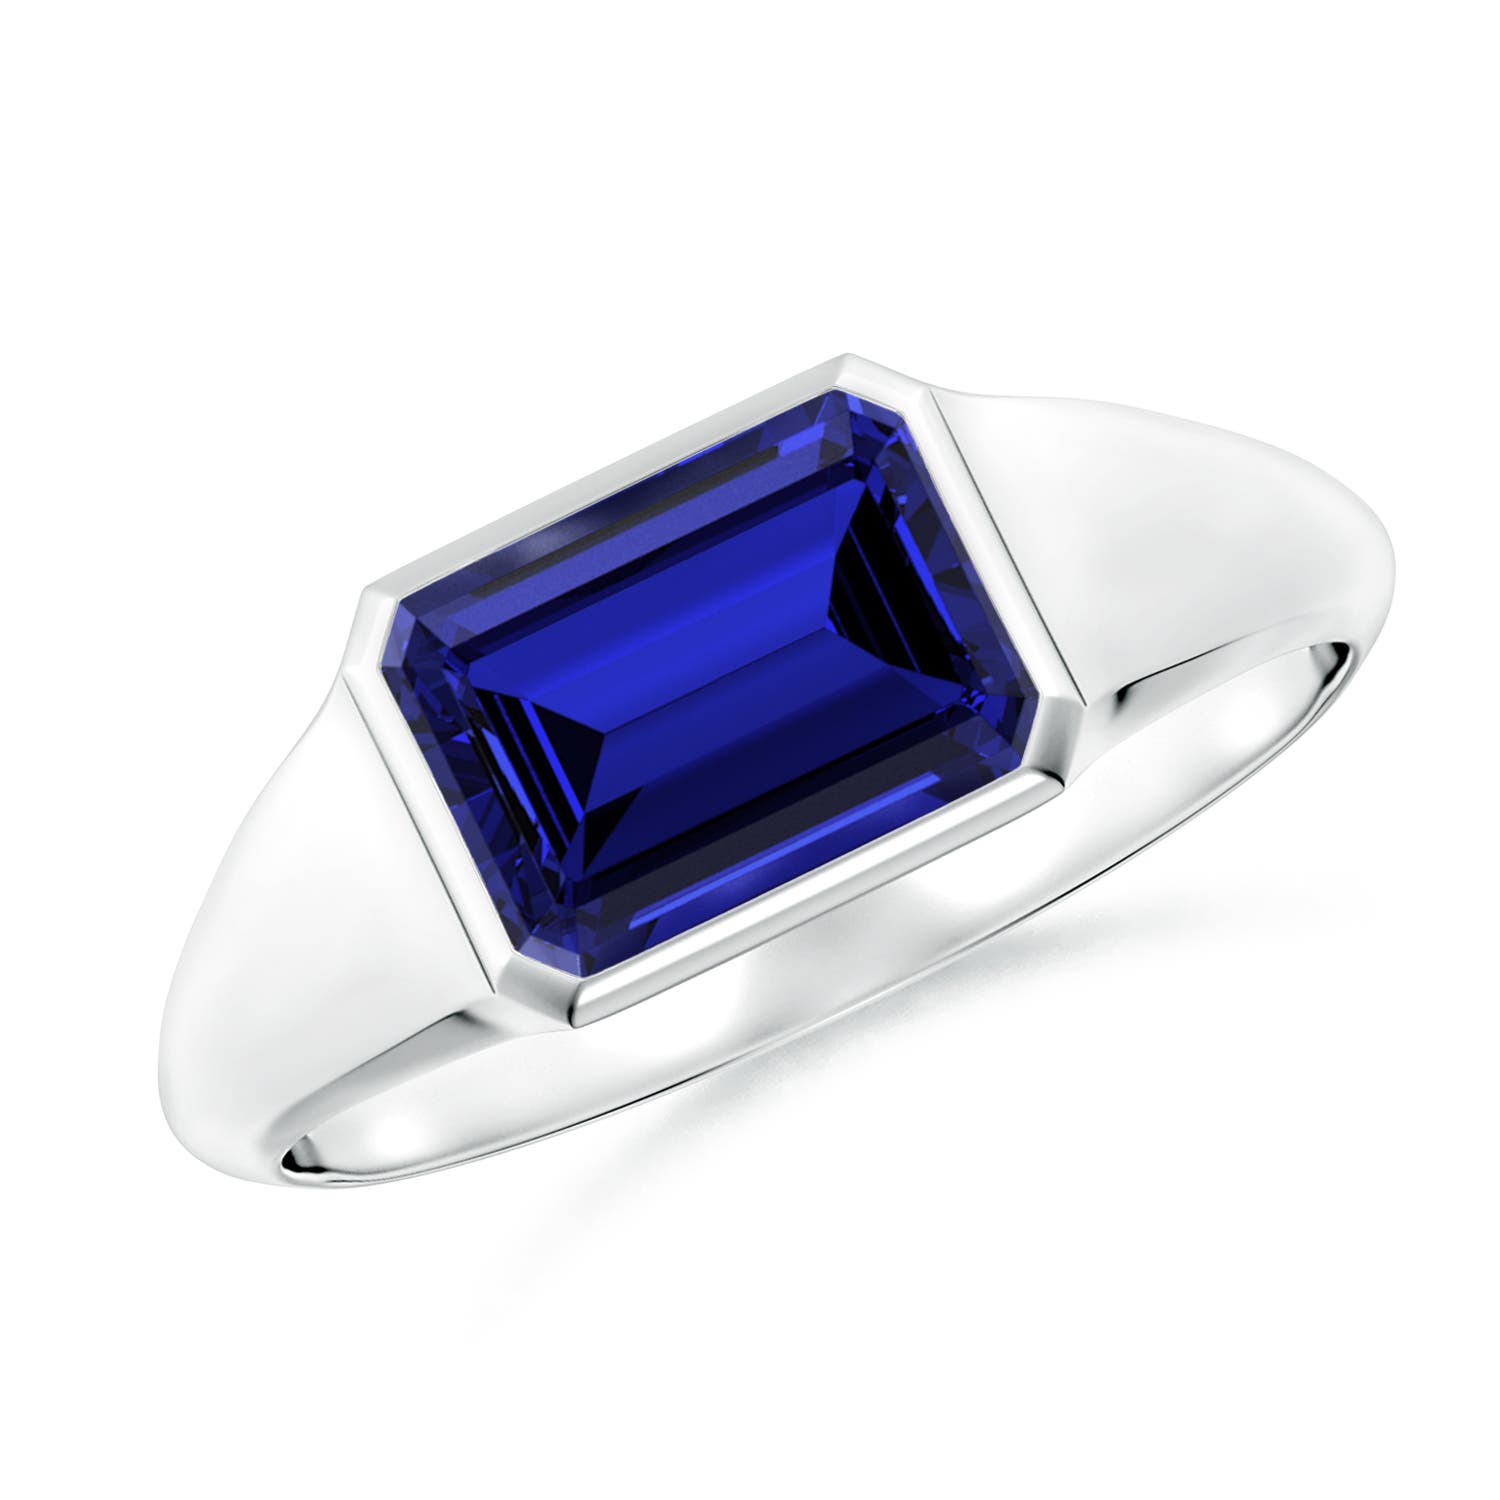 SJ SHUBHAM JEWELLERS Rehti 925 Sterling Silver Natural Certified Original  Blue Sapphire 8X10 MM OVAL Cubic Zirconia(CZ) Ring For Men, Women, Boys And  Girls With Lab Certificate » Shubham Jewellers Rehti